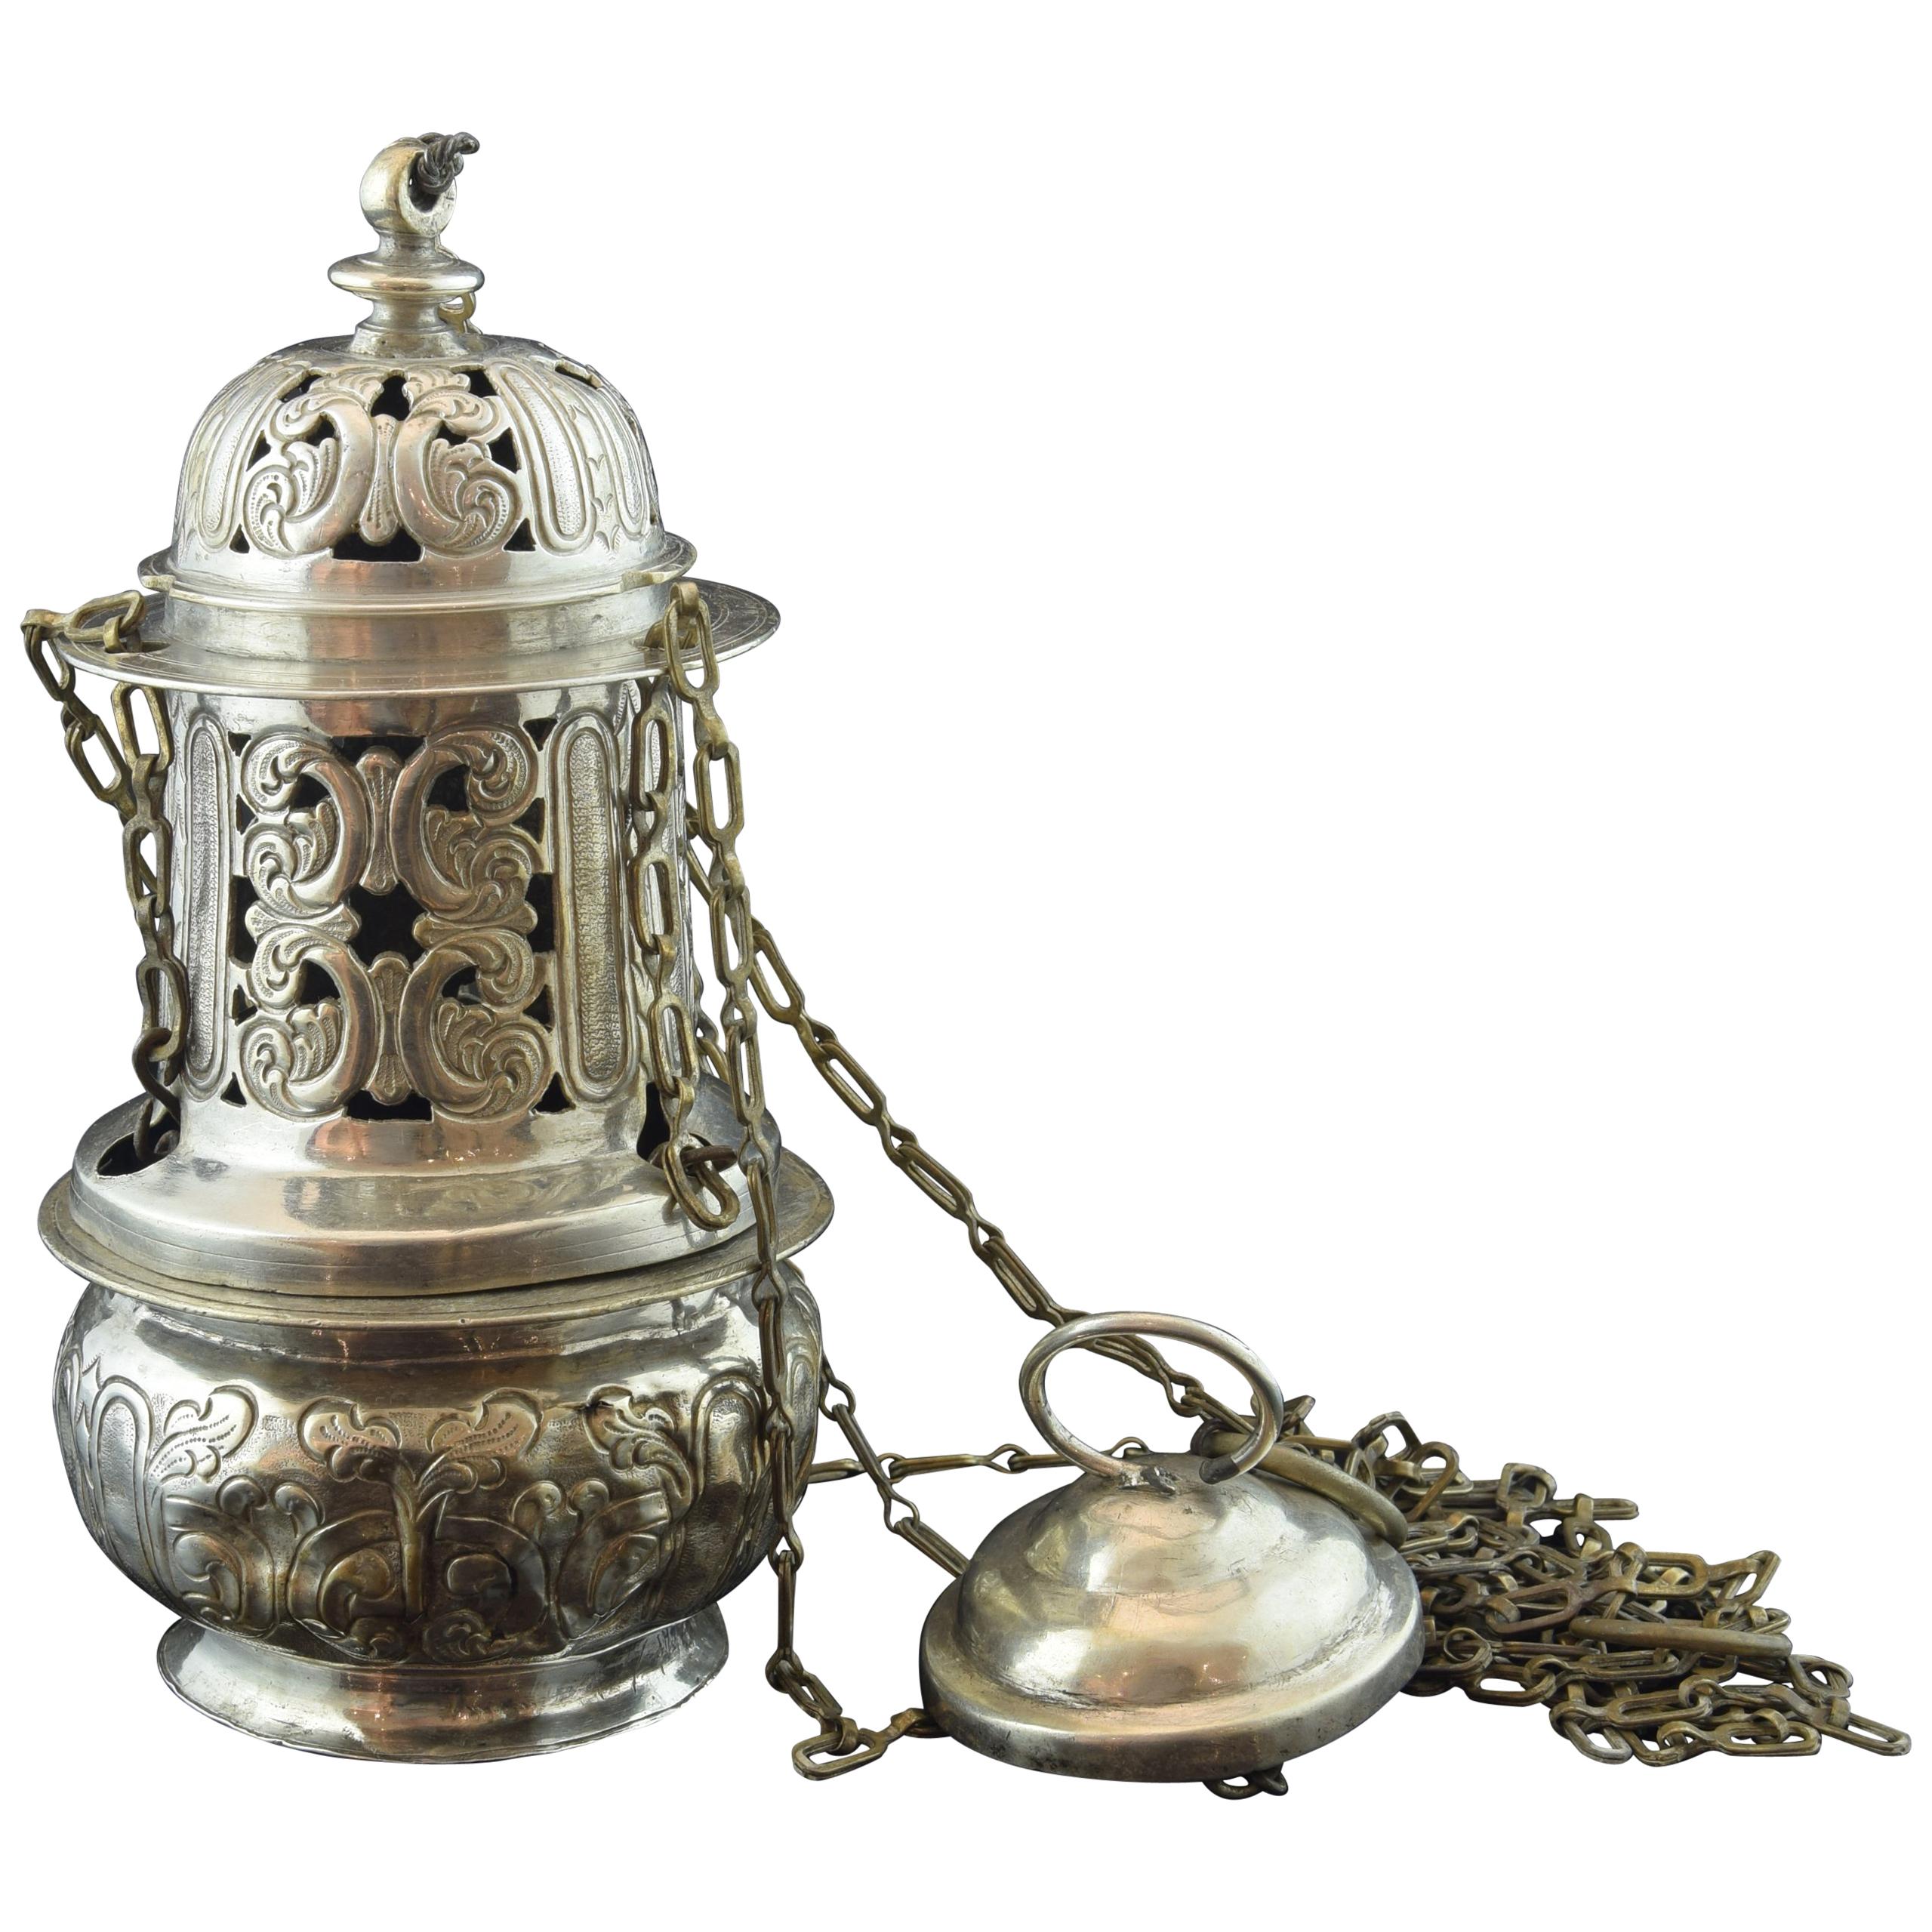 Solid Silver Thurible, Baroque, 17th Century